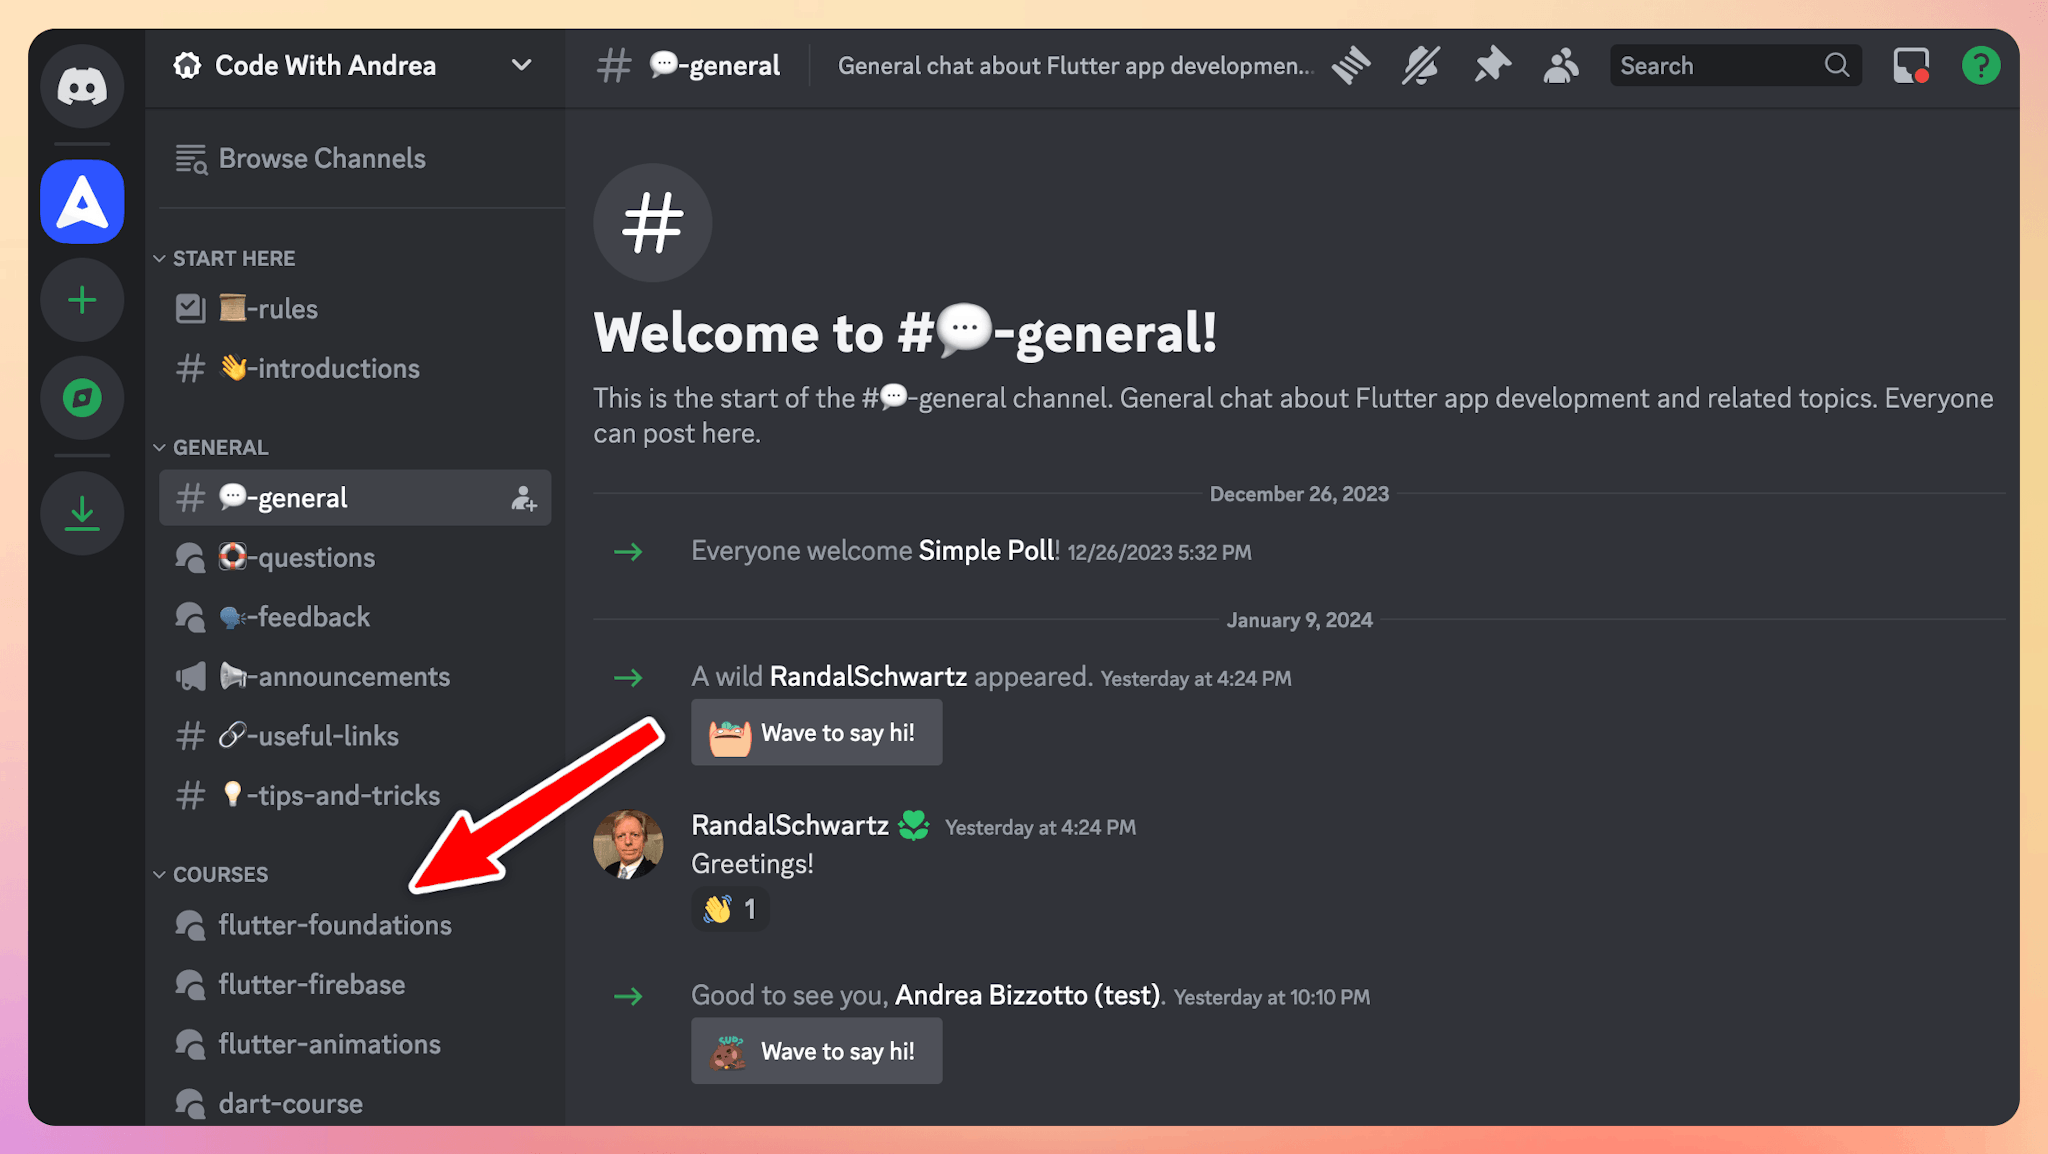 Discord Server for Code with Andrea